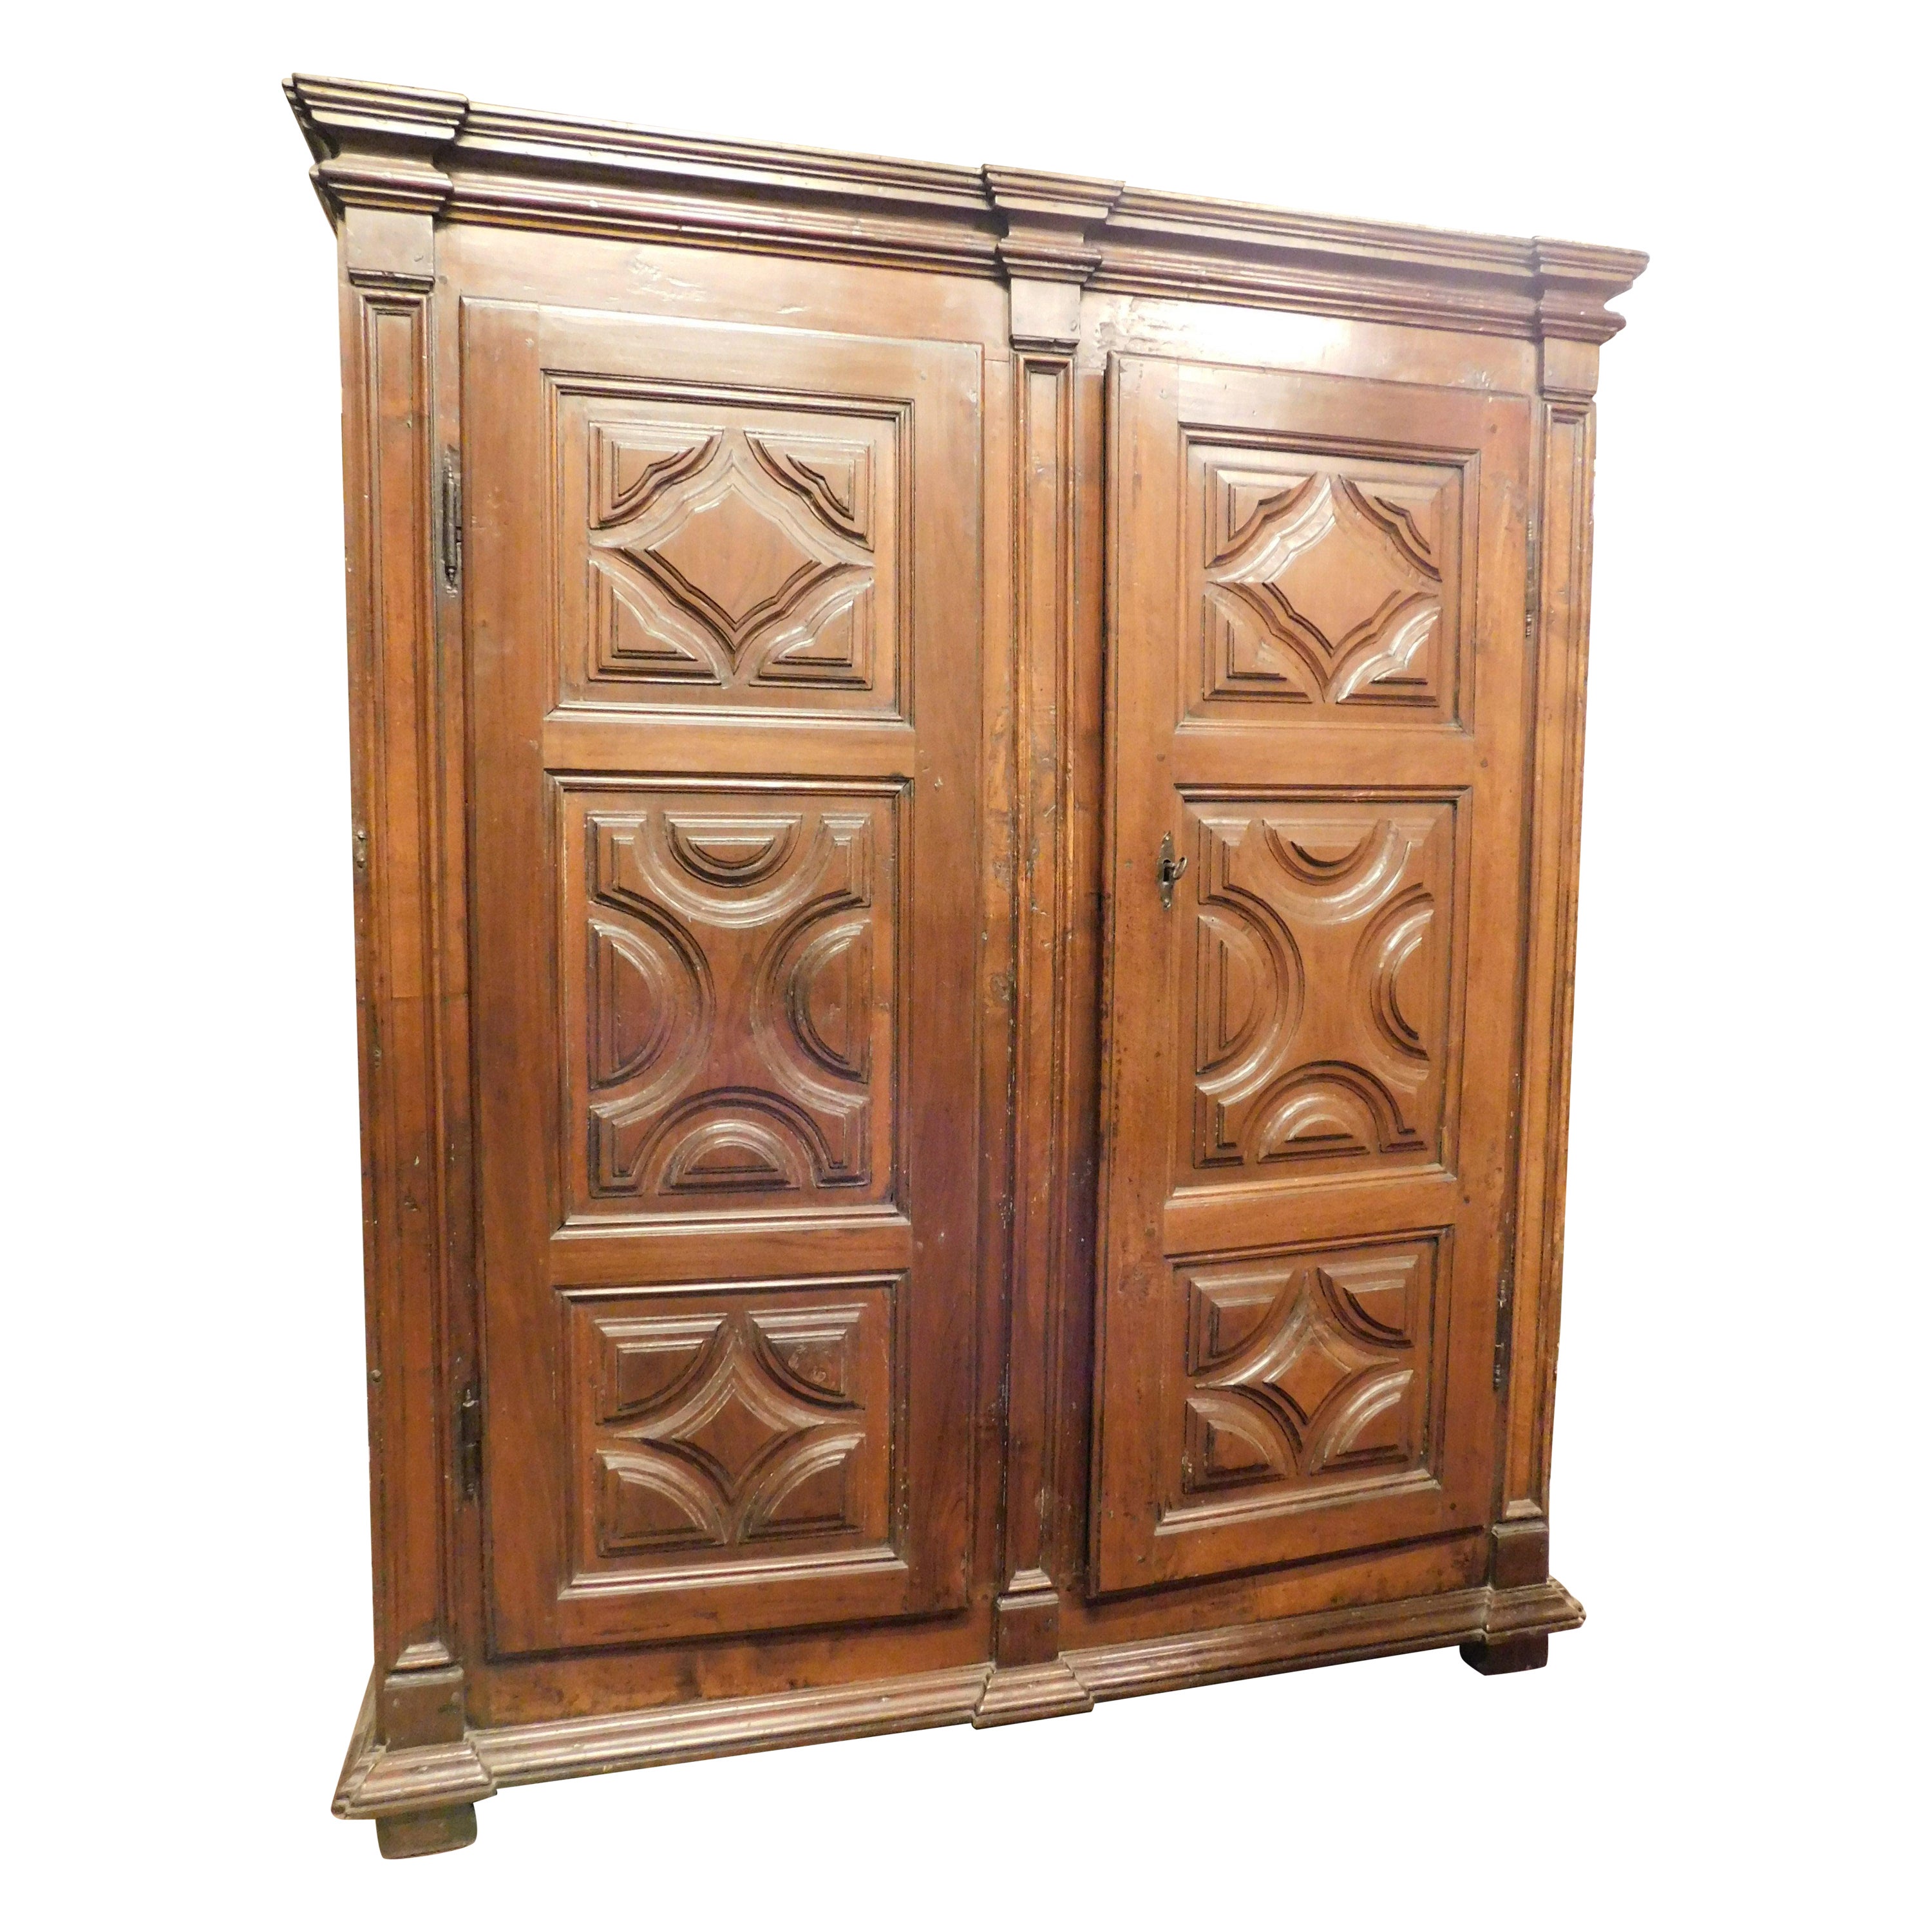 Two-door wardrobe armoires in carved walnut wood, Italy